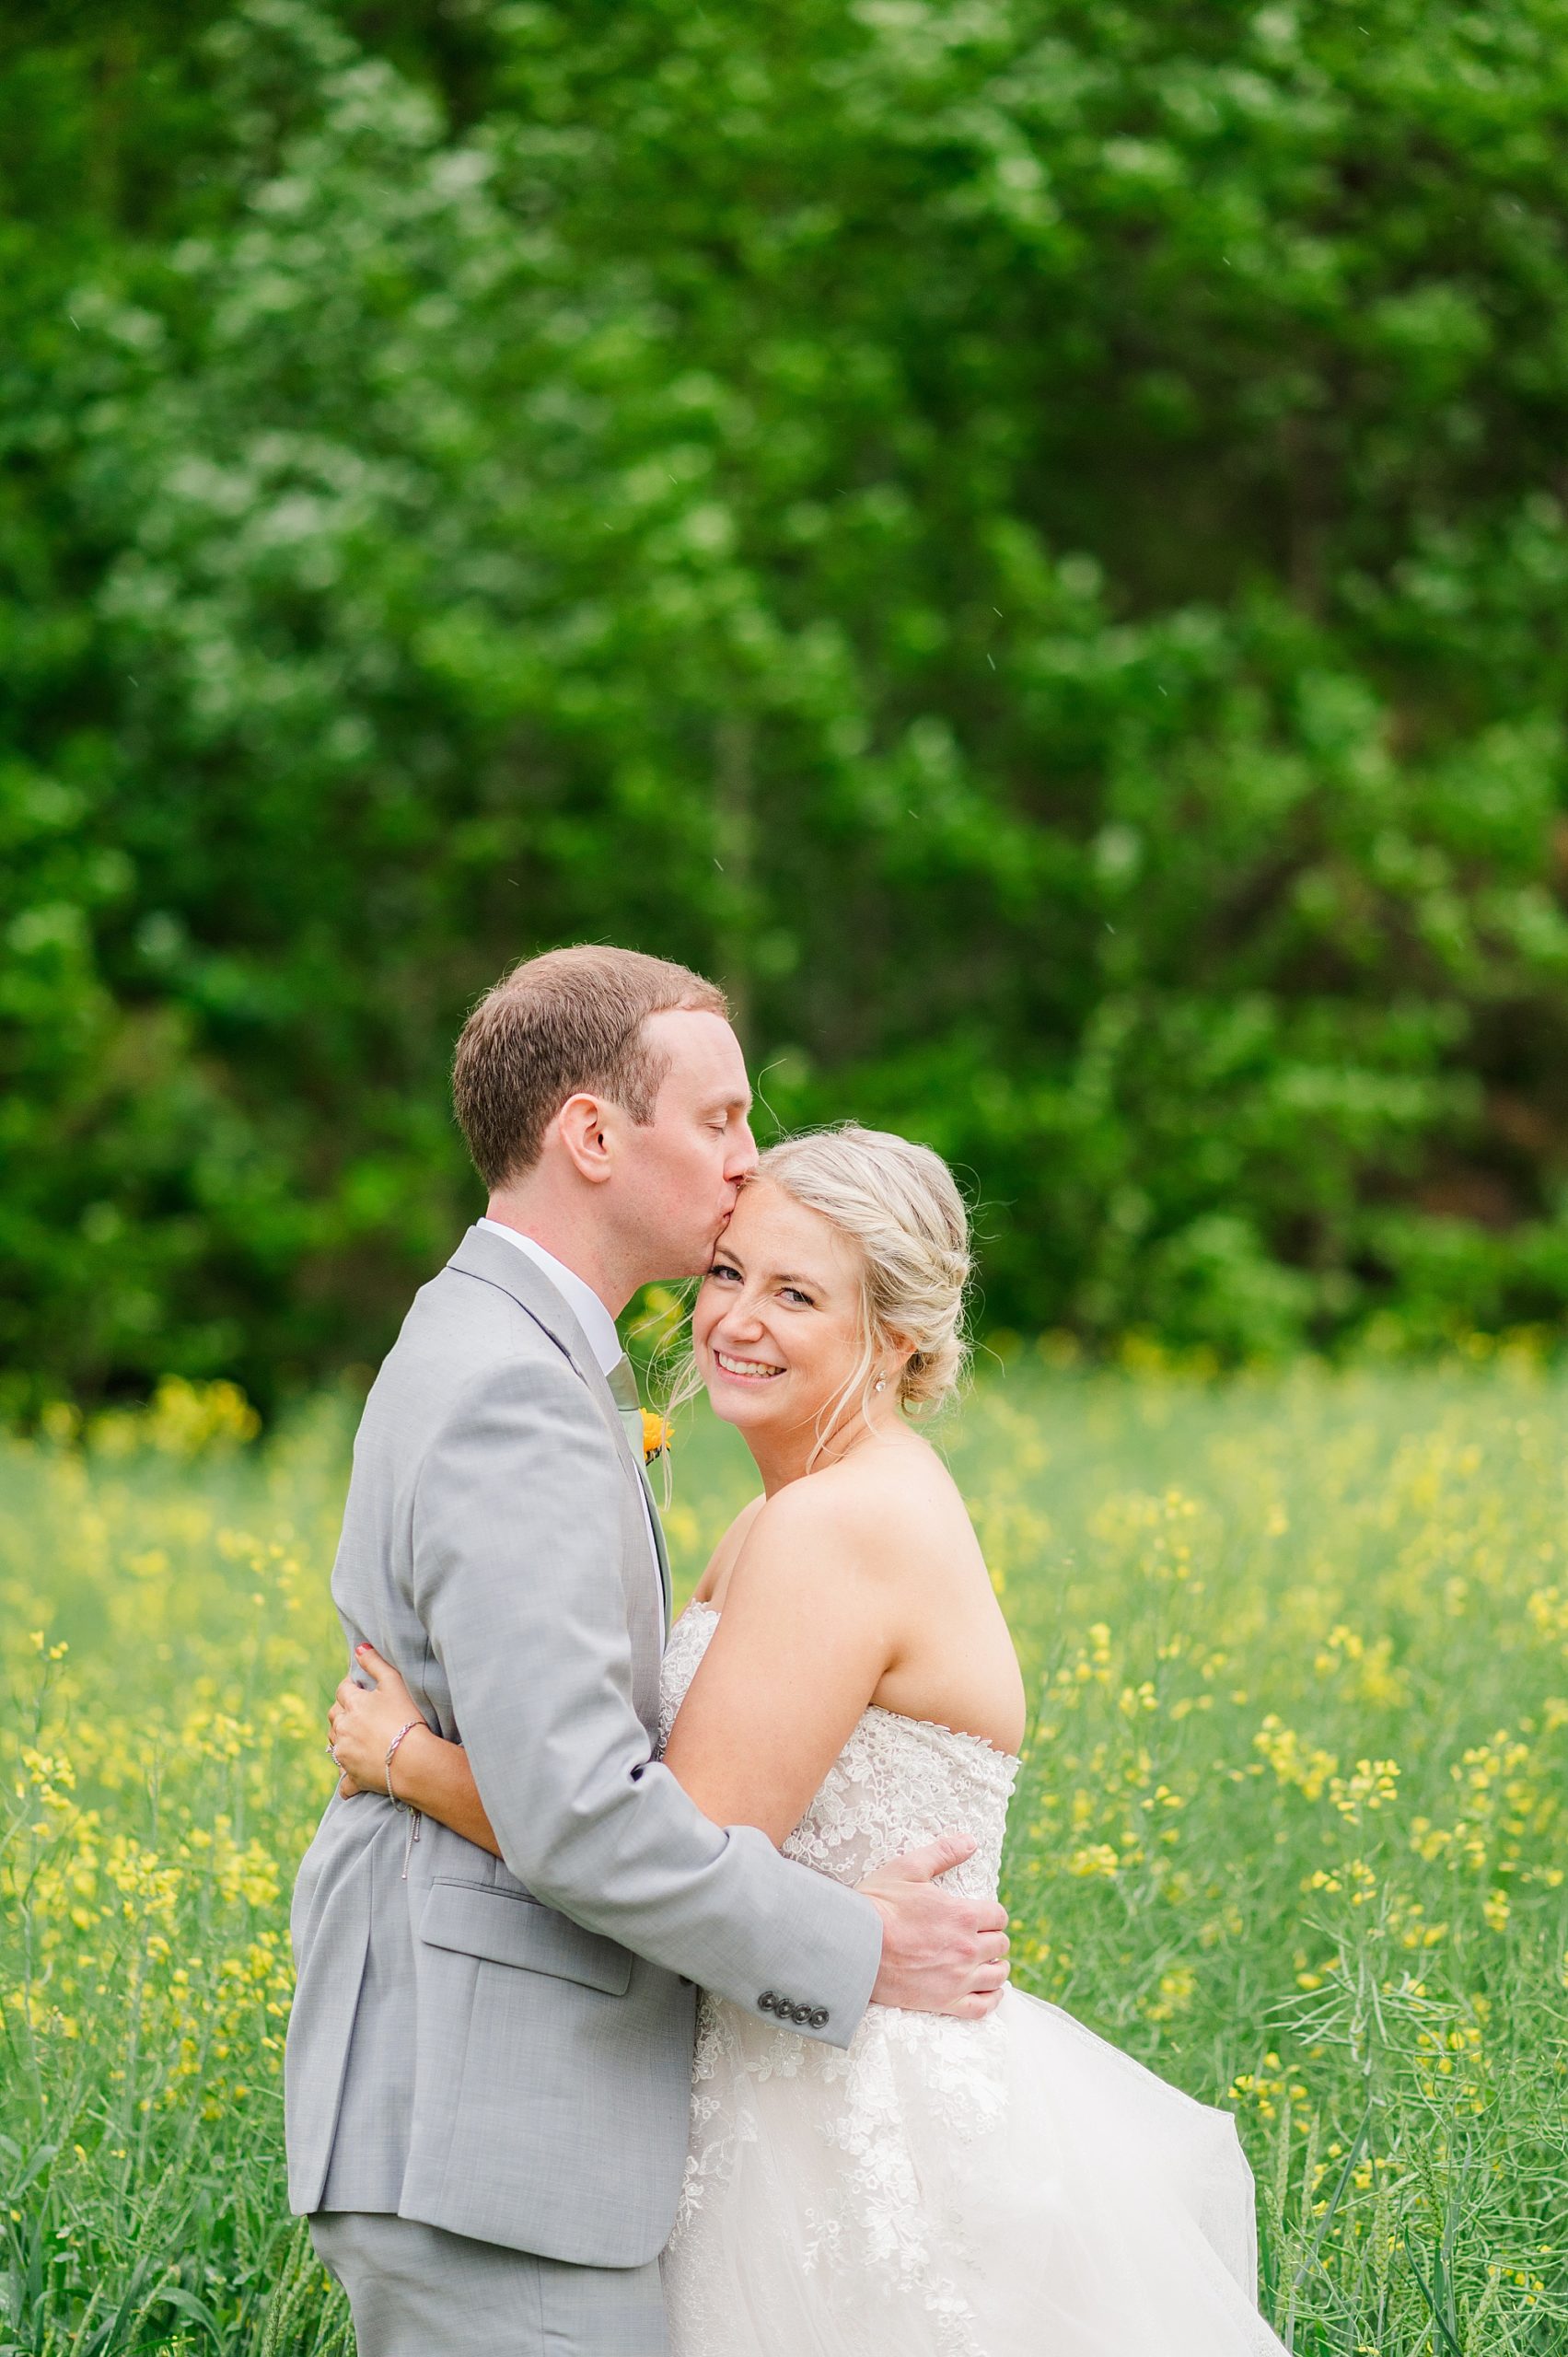 Bride and Groom Photos at Barn at Timber Creek Wedding. Wedding Photography by Kailey Brianne Photography